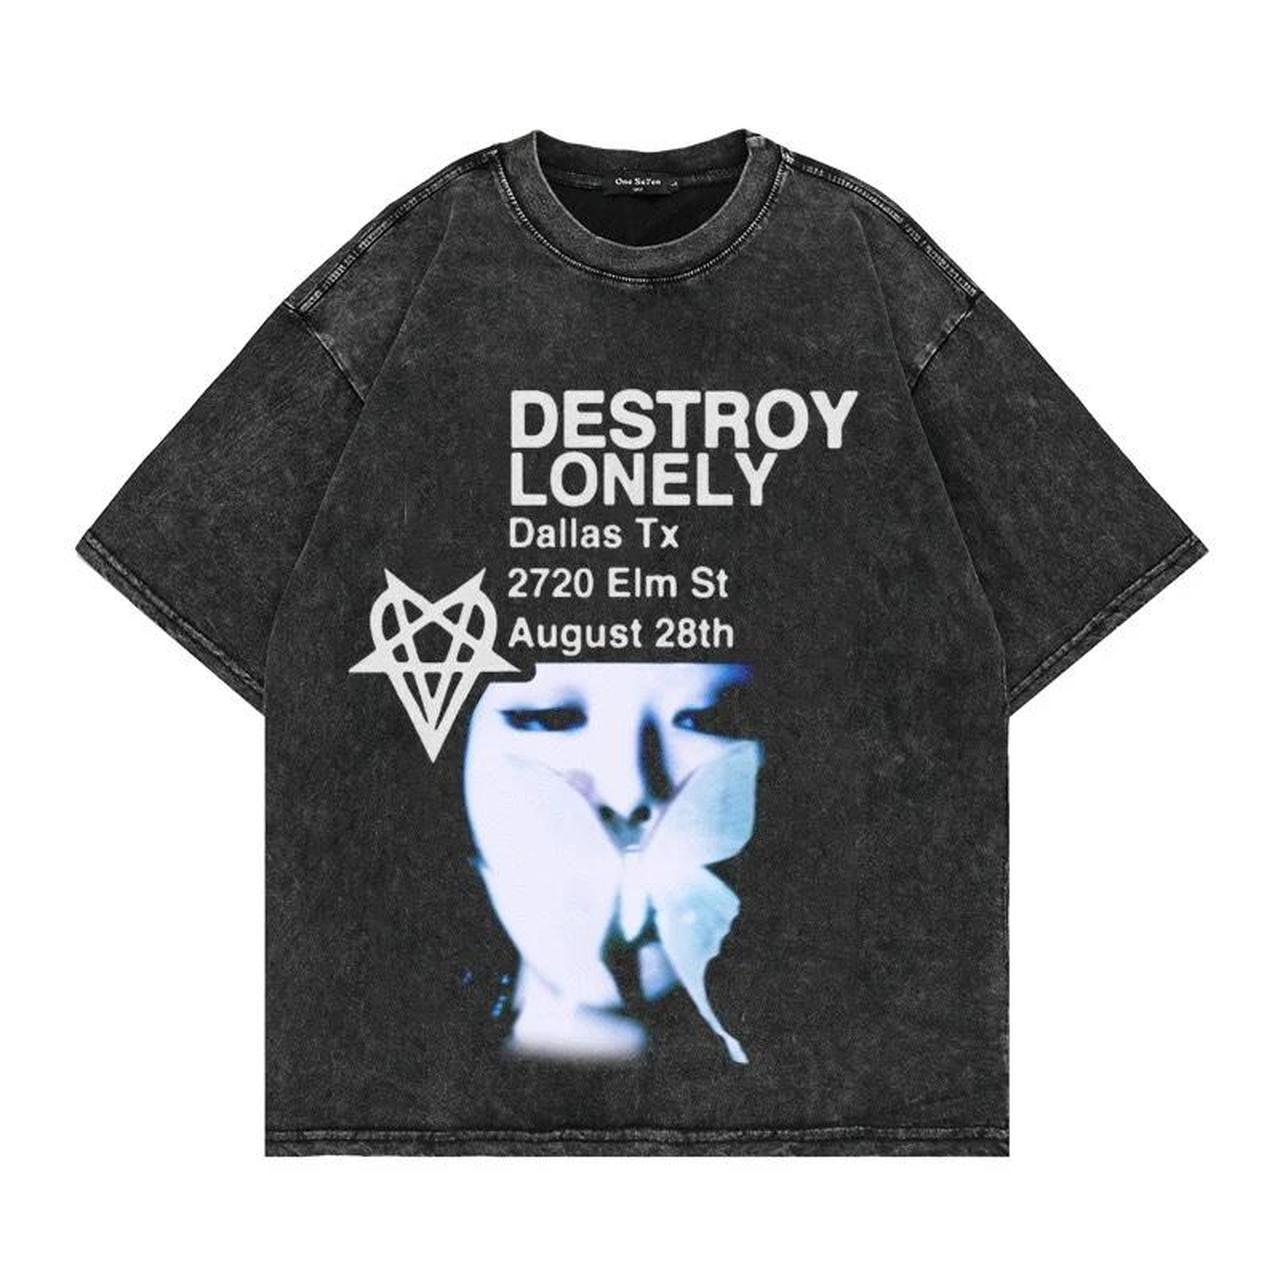 Destroy Lonely Dallas TX Graphic Tee Ships in 1-3... - Depop